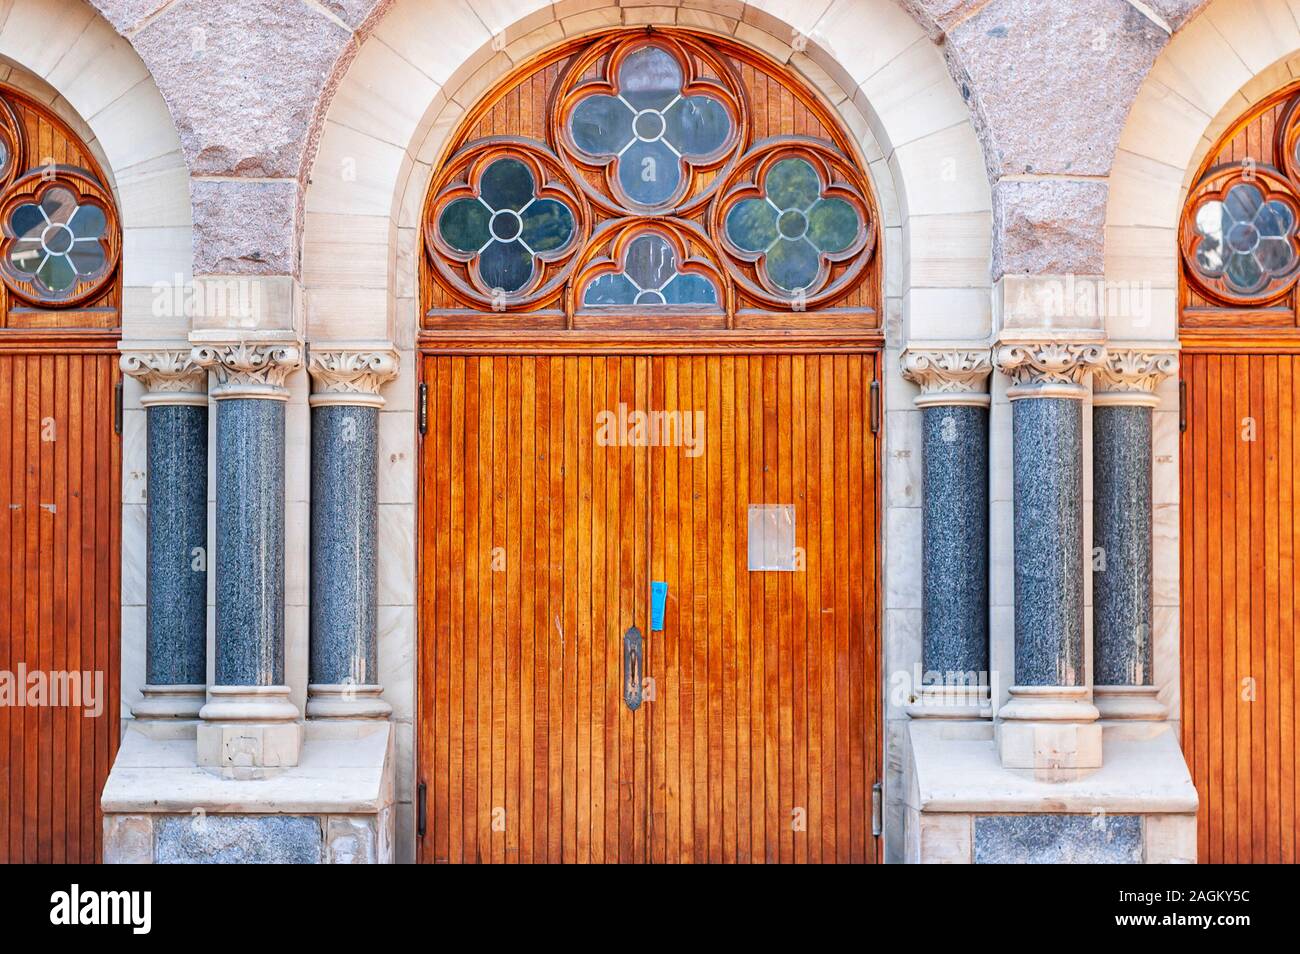 An arched doorway of the St. Thomas the Apostle catholic church at 530 Elizabeth St Ann Arbor, Michigan. The lunette has decorative windows. Stock Photo